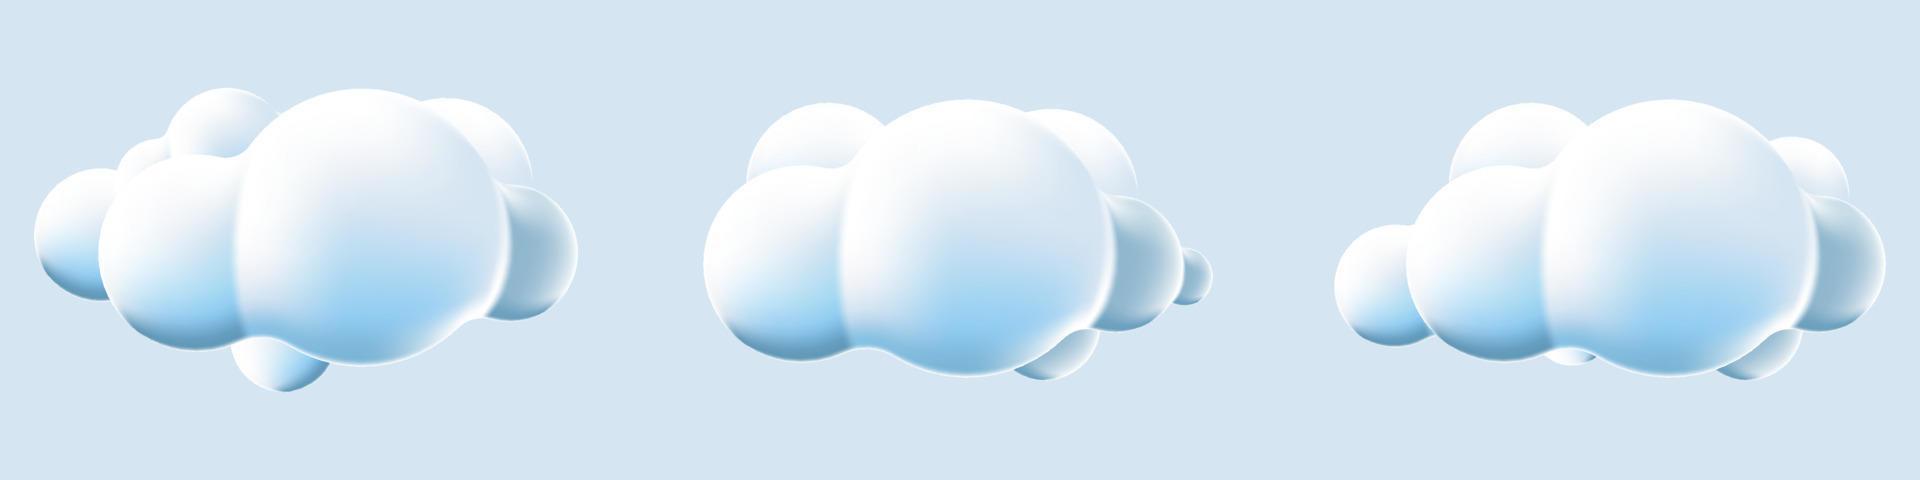 3d clouds set isolated background. Render soft round cartoon fluffy clouds icons. 3d geometric shapes. Various cartoon soft cloud shapes. Vector illustration